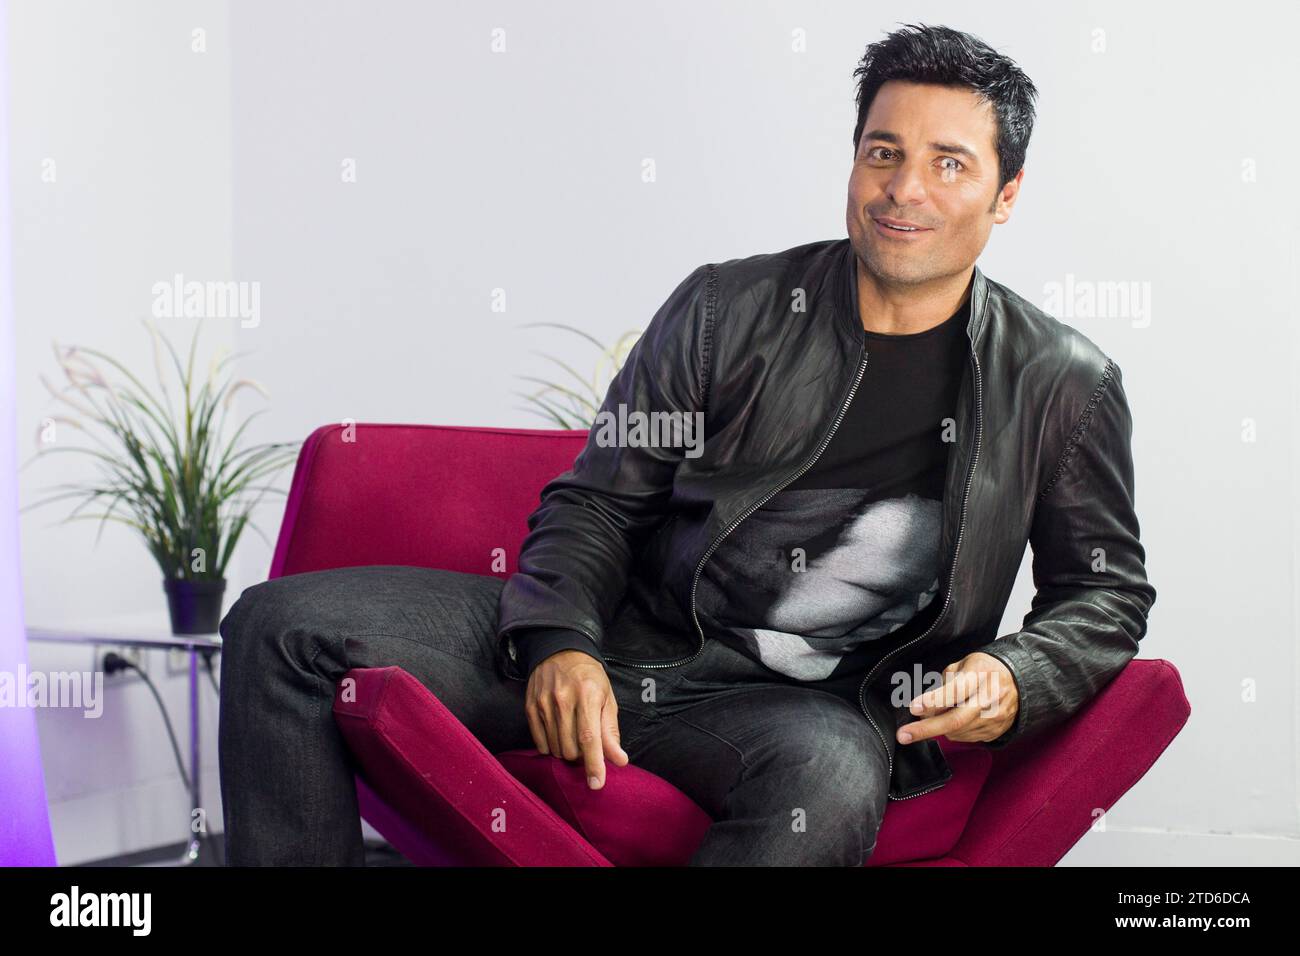 Madrid, 10/10/2014. Interview with Chayanne. Photo Isabel Permuy Archdc. Credit: Album / Archivo ABC / Isabel B Permuy Stock Photo